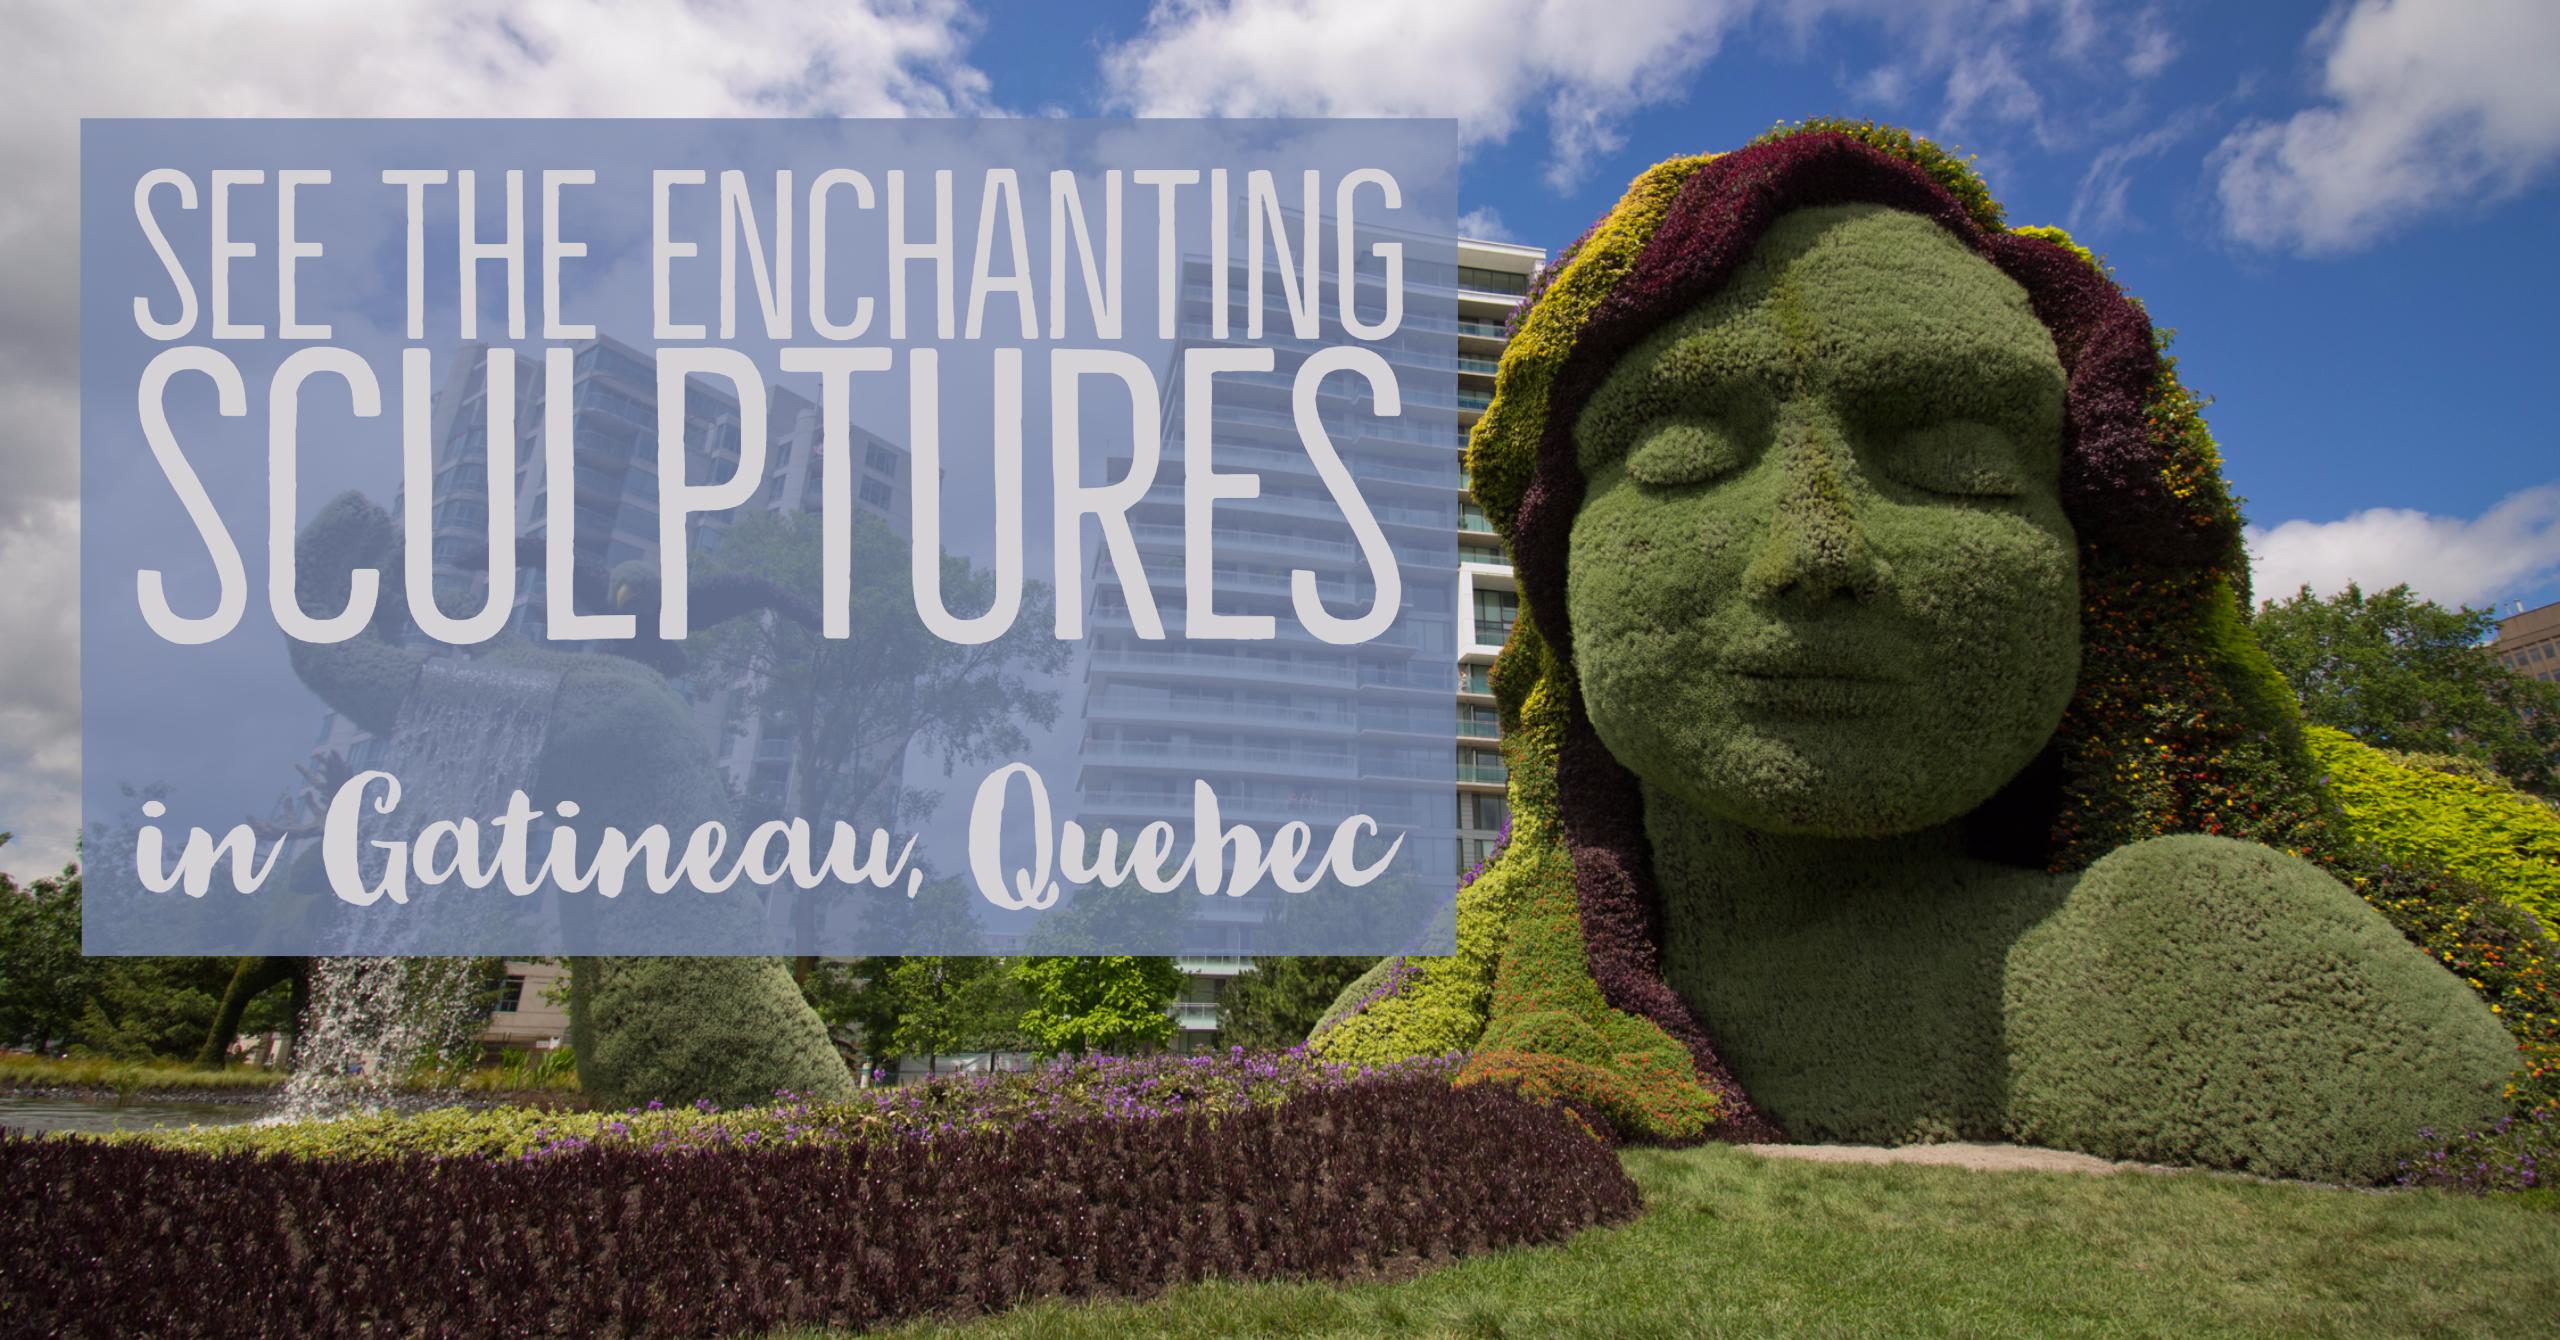 Check out the beautiful living sculptures at the MosaiCanada150 exhibit at Jacques-Cartier Park in Gatineau, Quebec before it disappears! | My Wandering Voyage travel blog